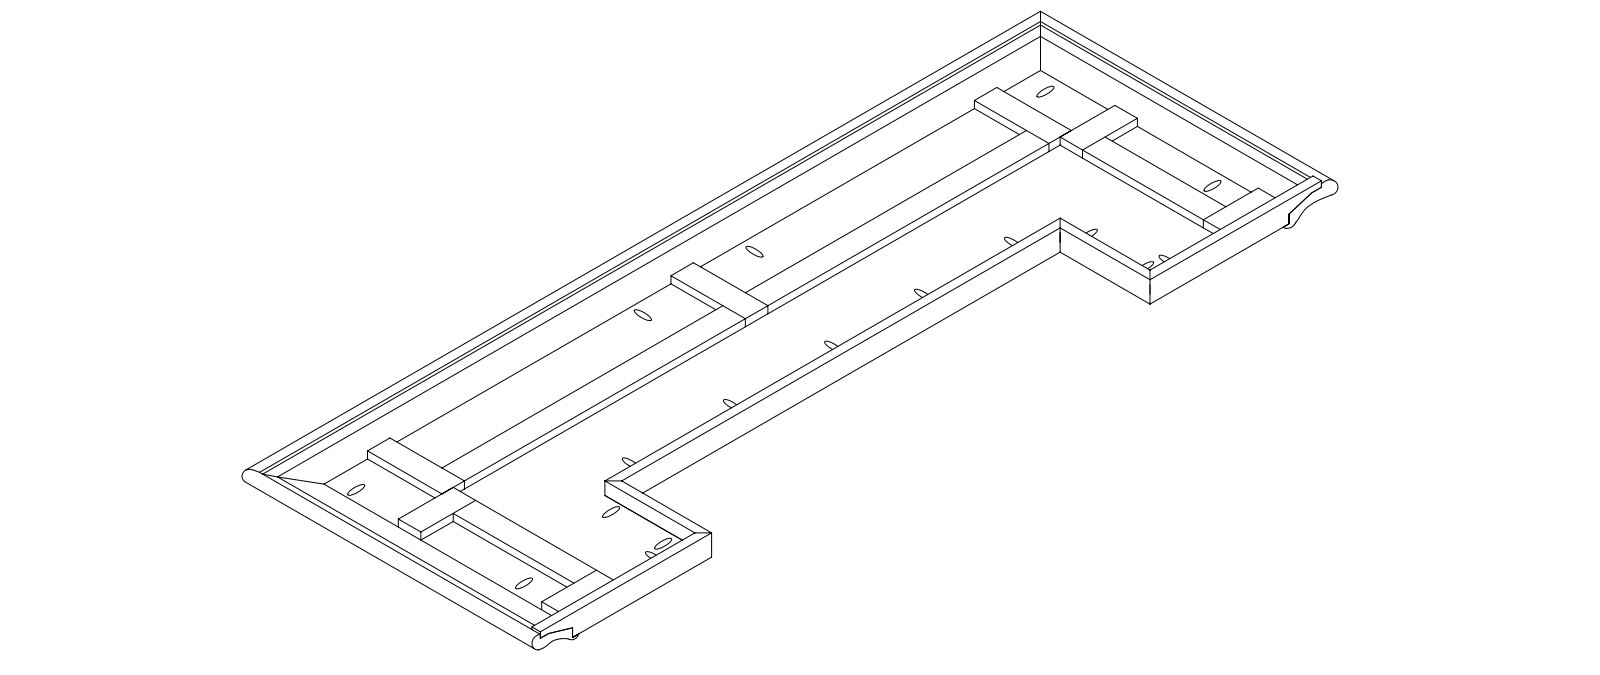 Assembly Drawing - Attach Top To Armrest